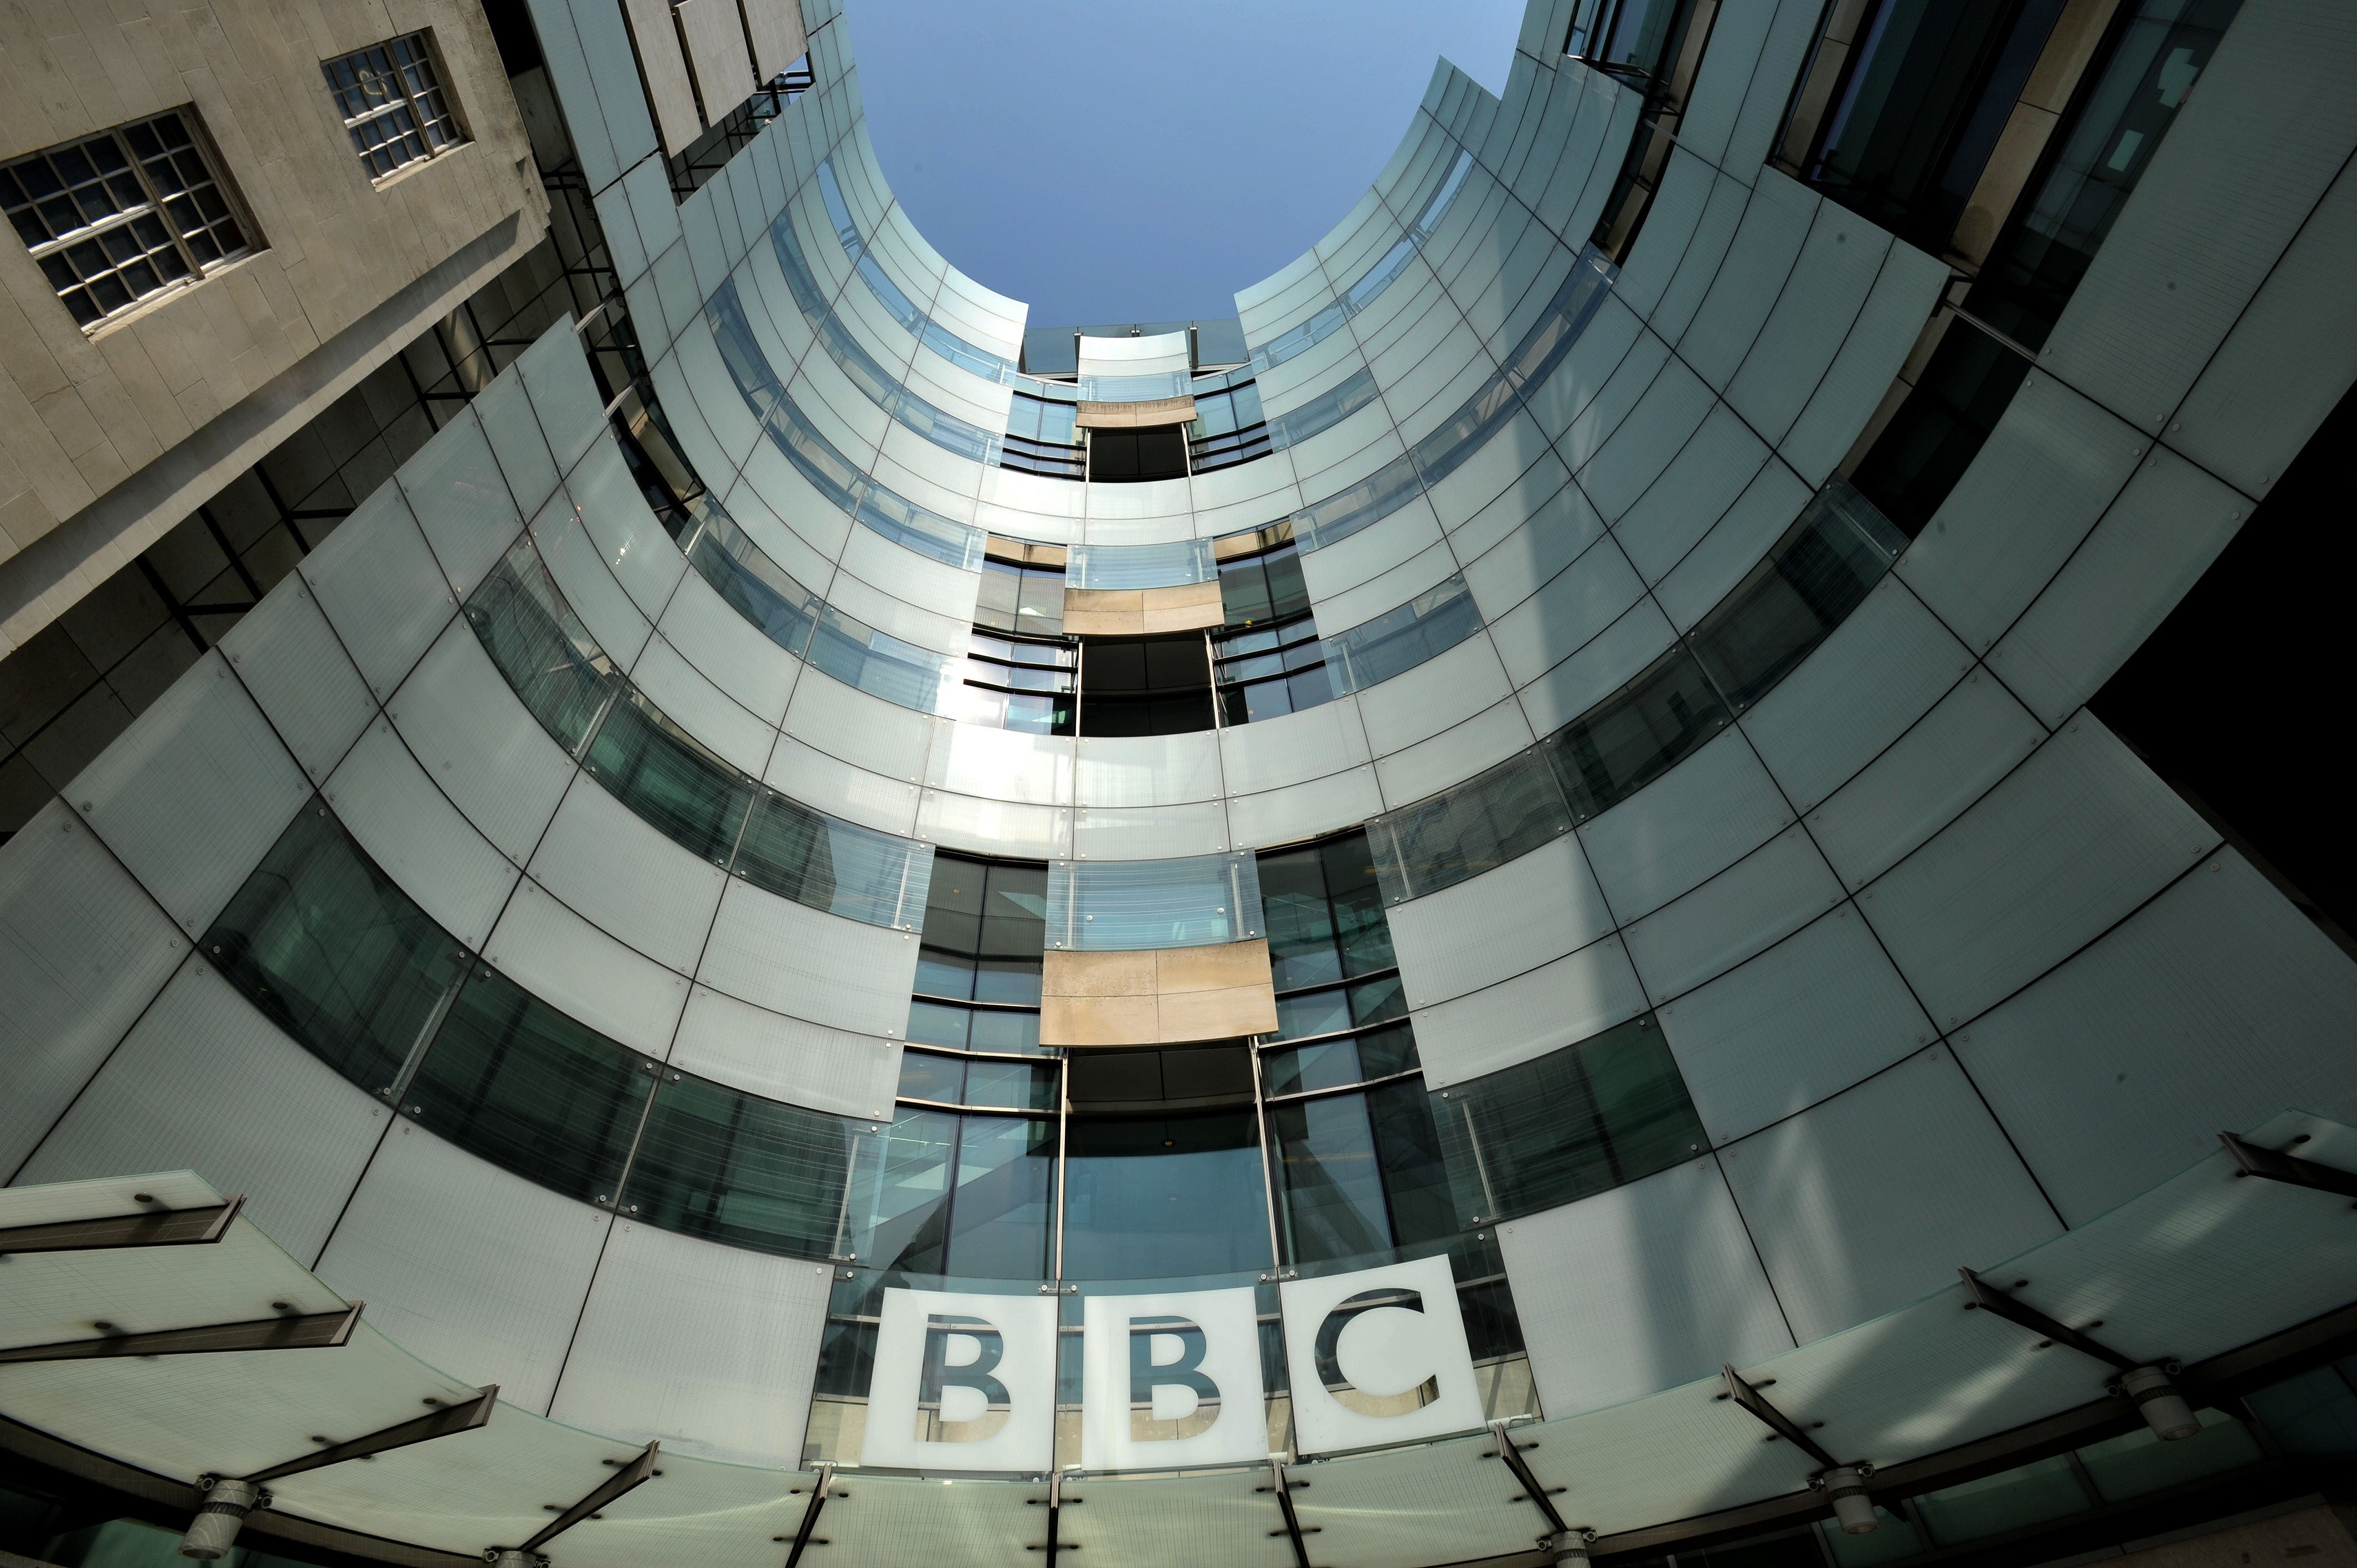 The director-general of the BBC said that ‘the stakes are high’ for the corporation in the ‘fight’ to provide its services